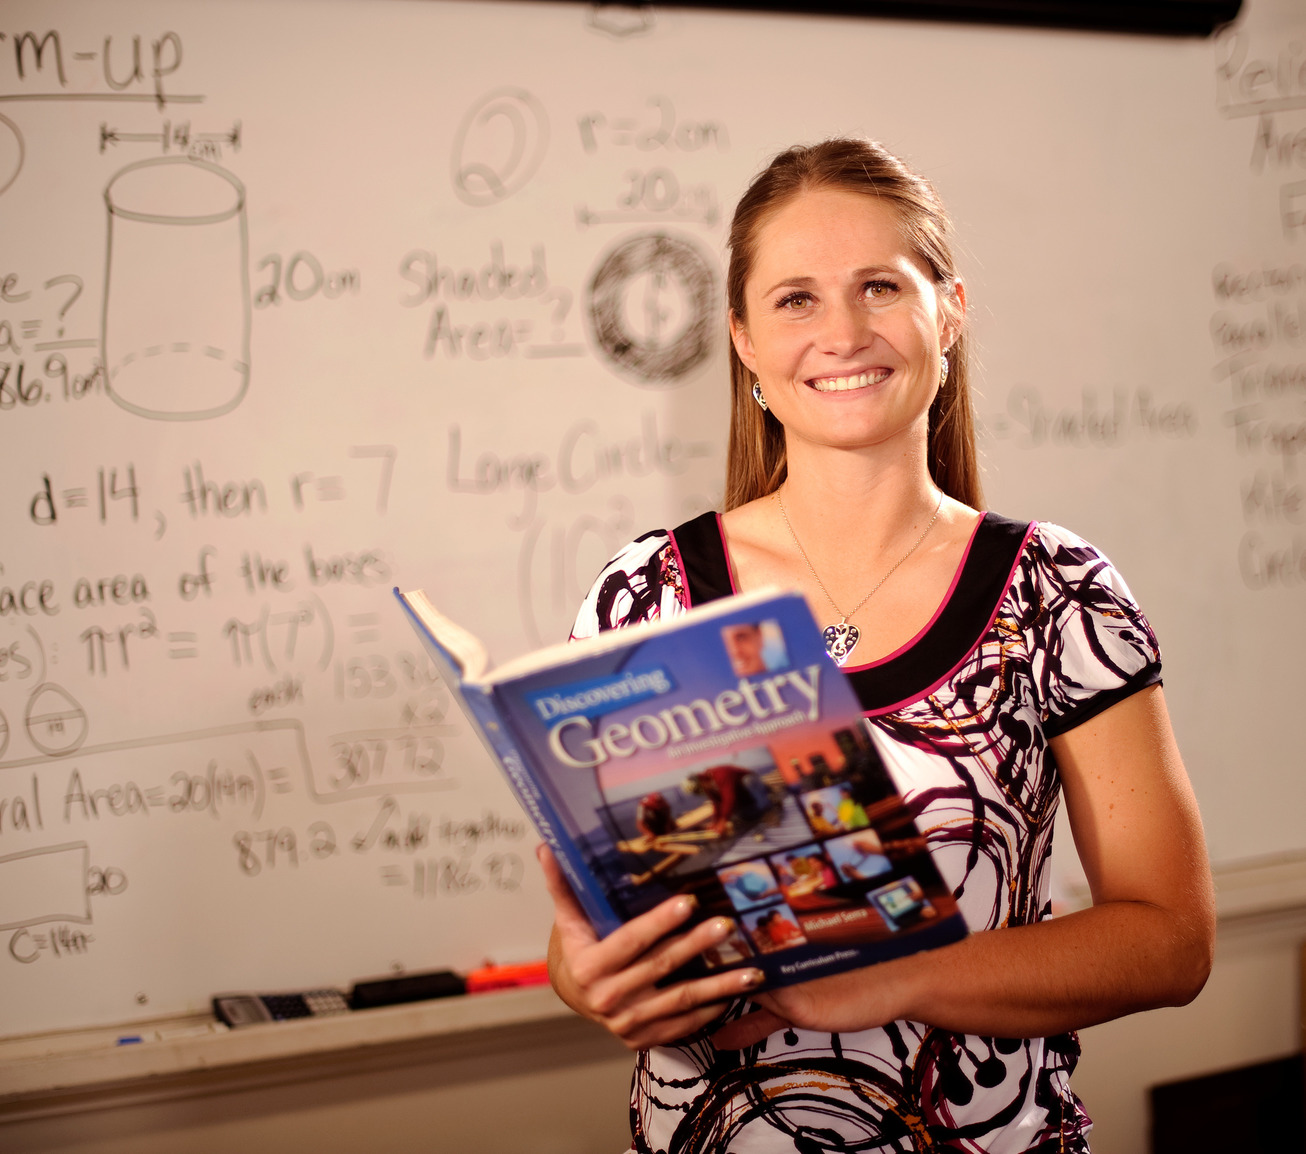 Teacher posing with geometry book in front of white board